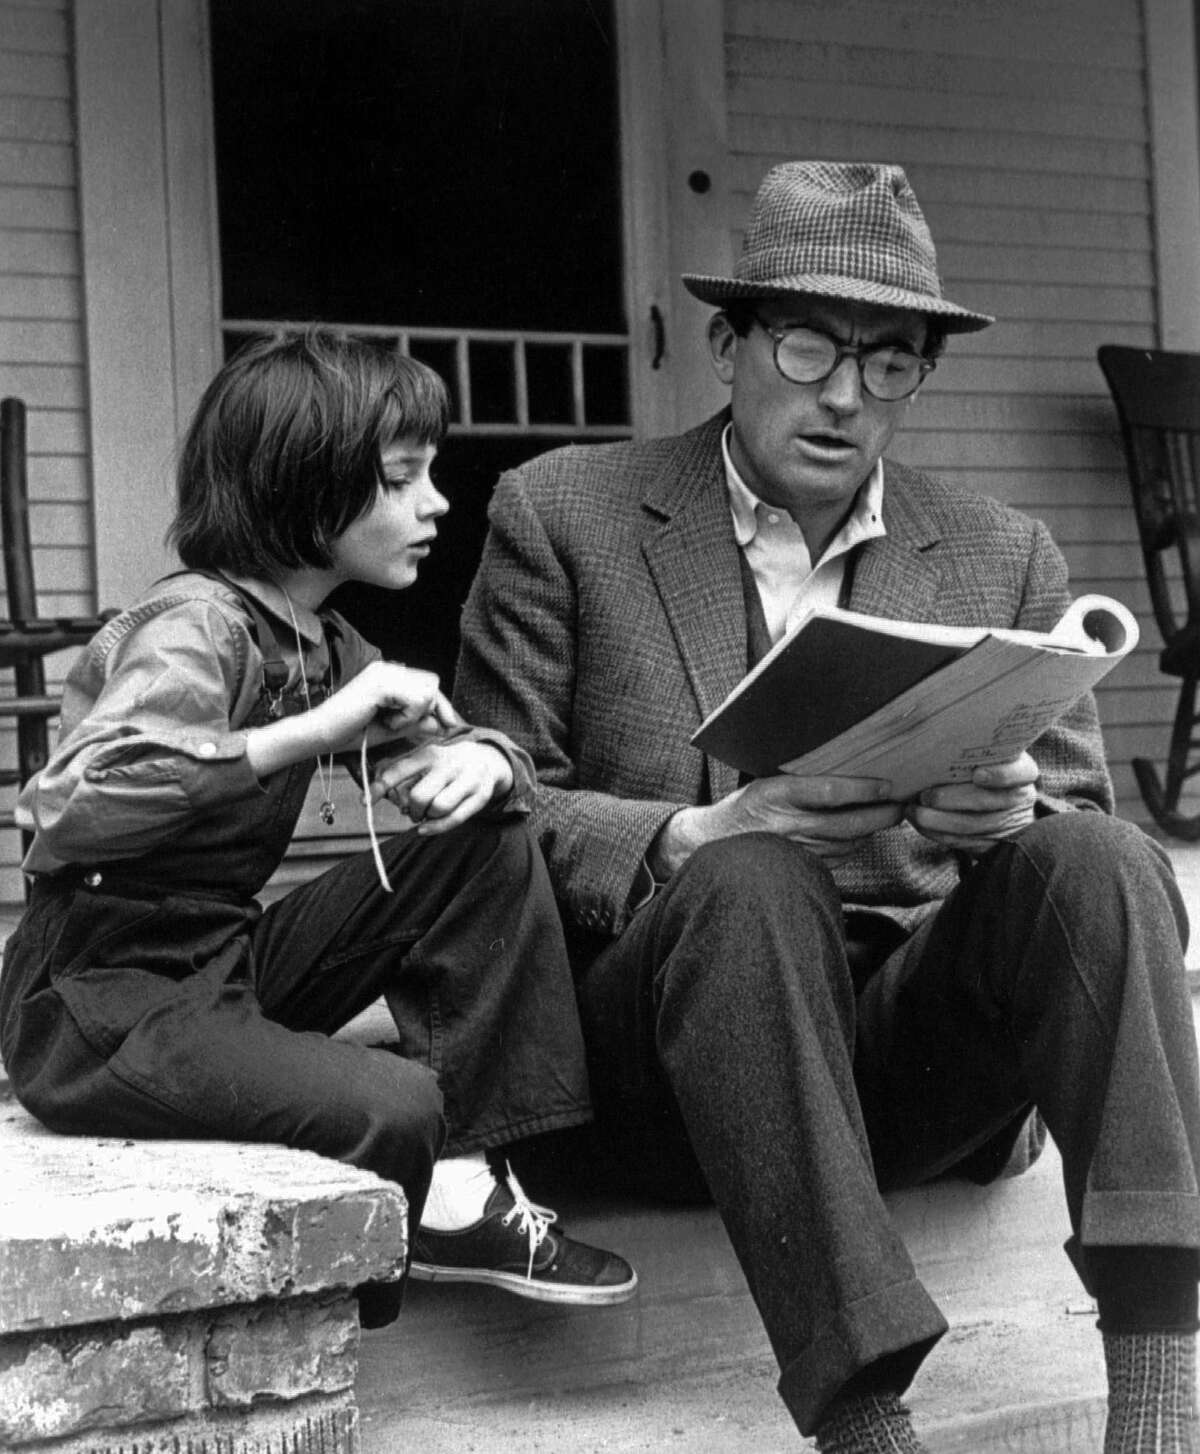 Gregory Peck and 9-year-old Mary Badham study their lines on the set of the film "To Kill a Mockingbird" in 1962.